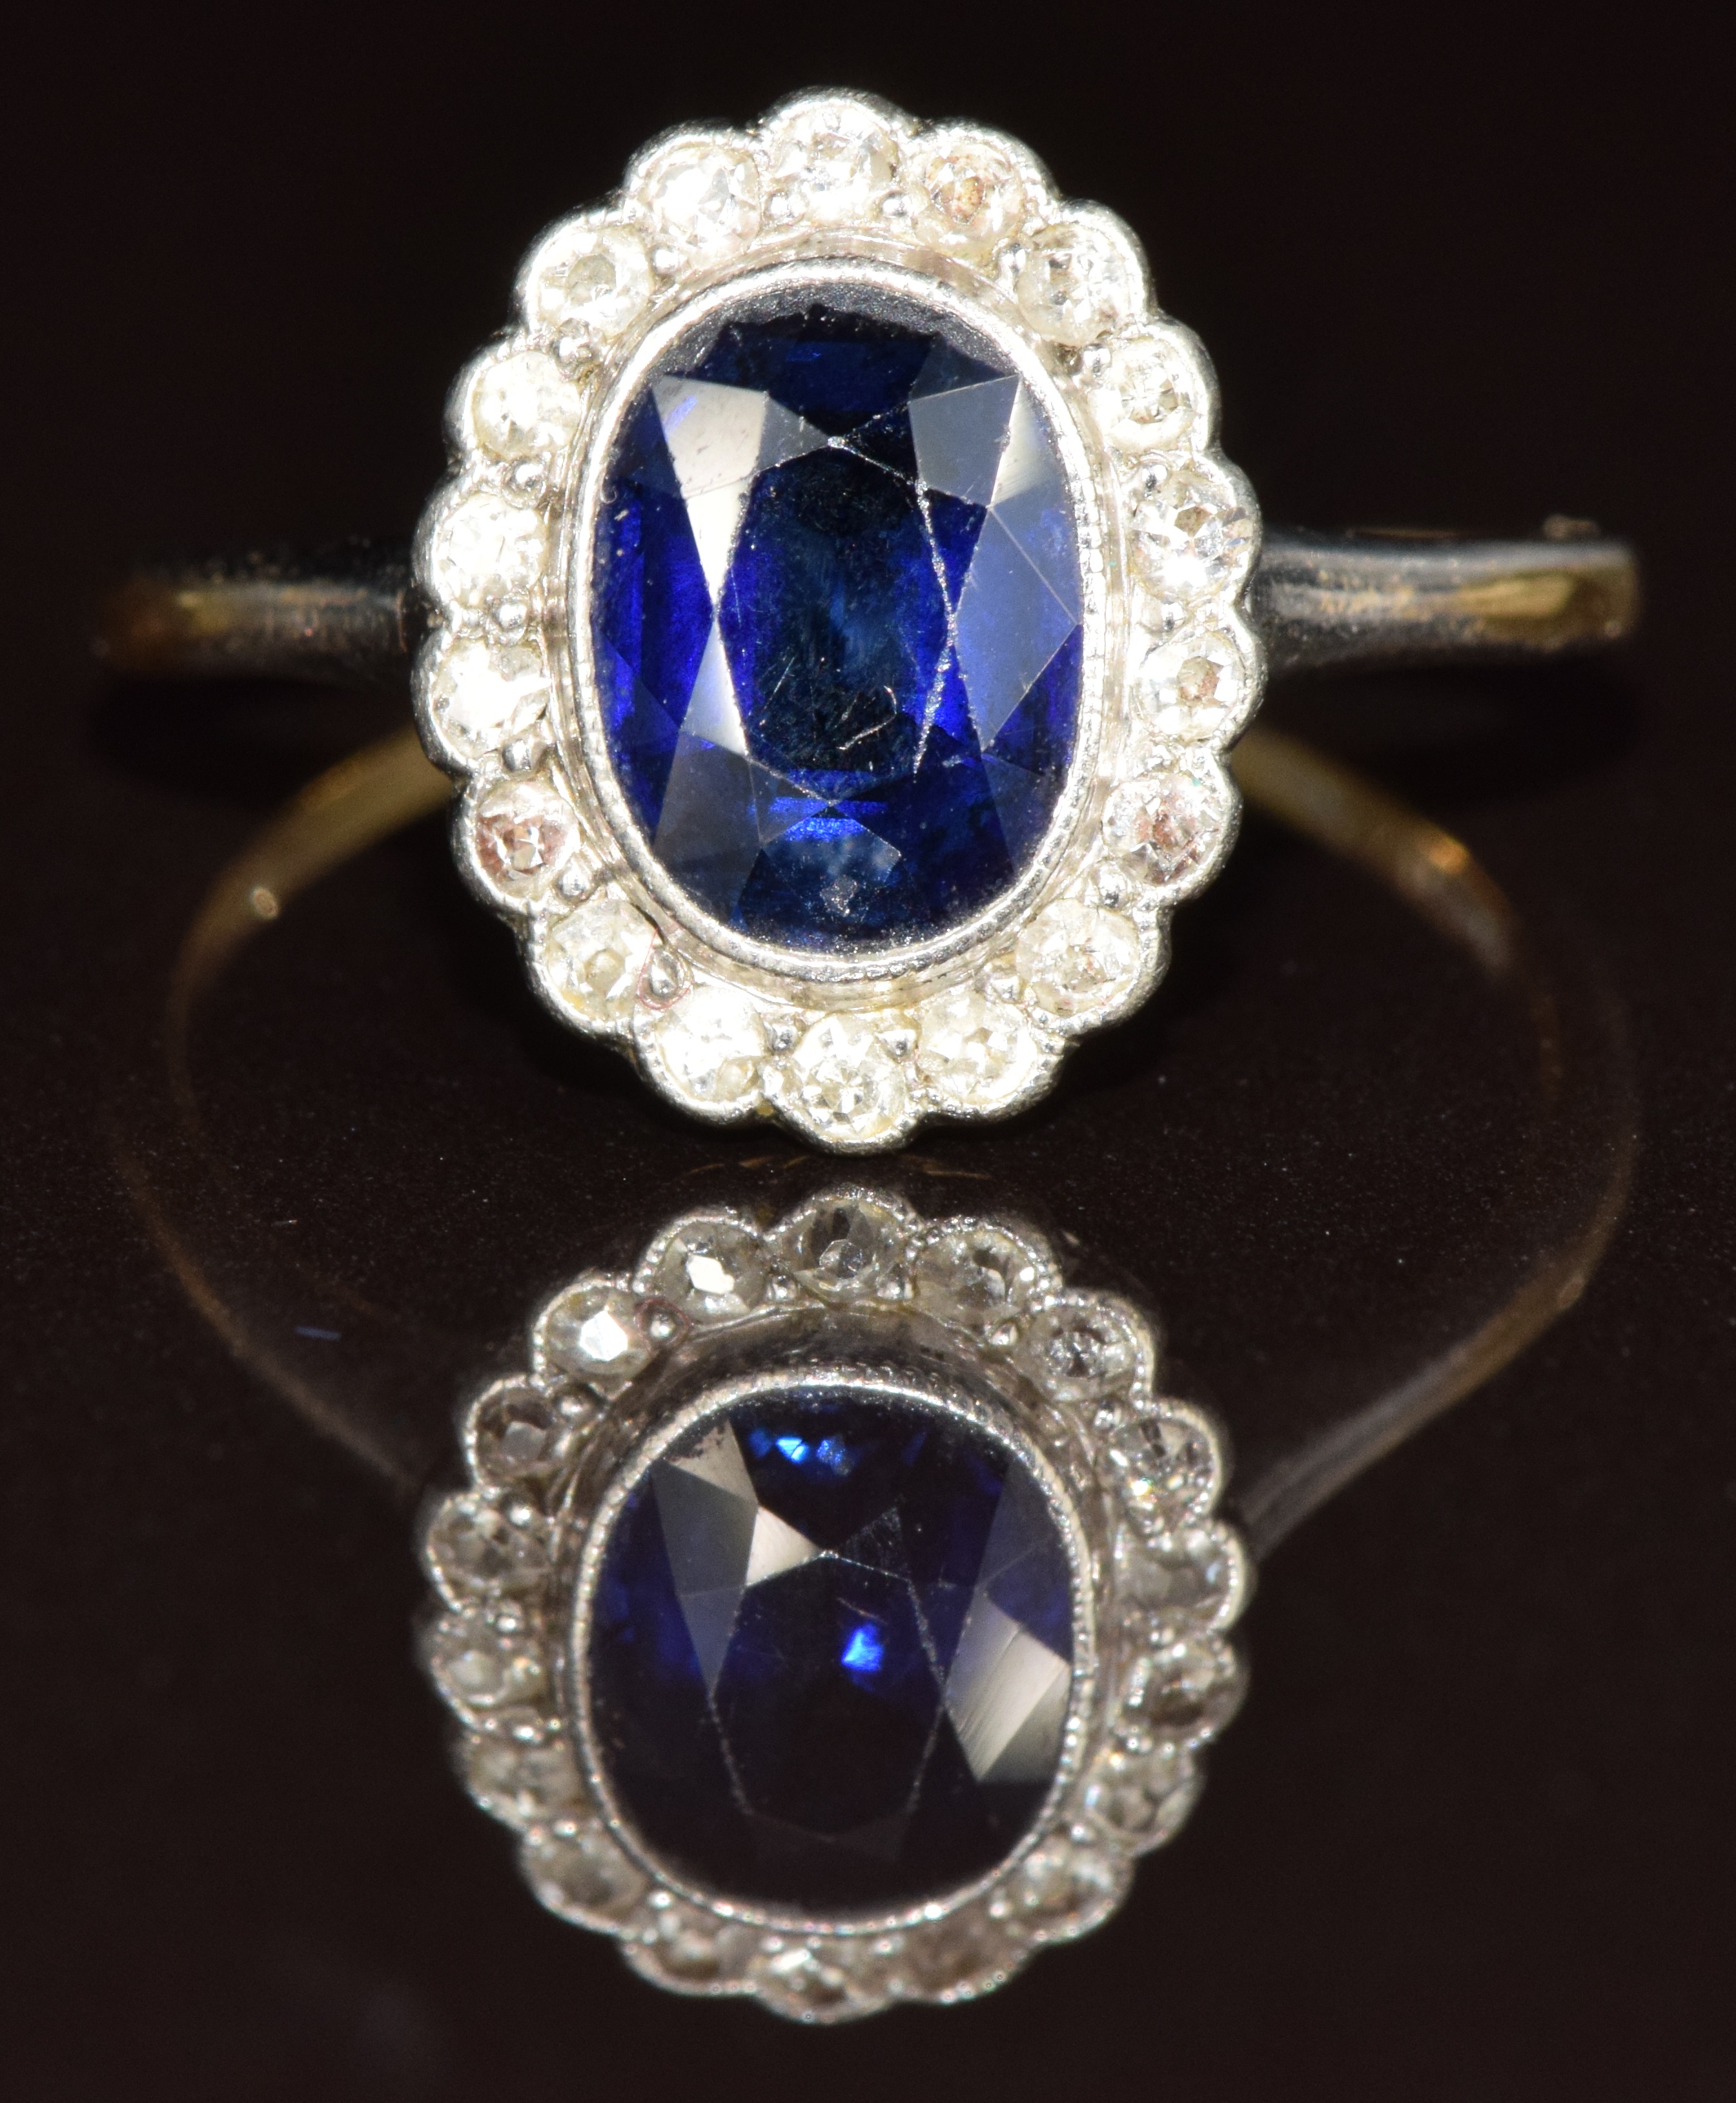 An 18ct white gold ring set with an oval cut sapphire of approximately 1.2ct surrounded by diamonds,